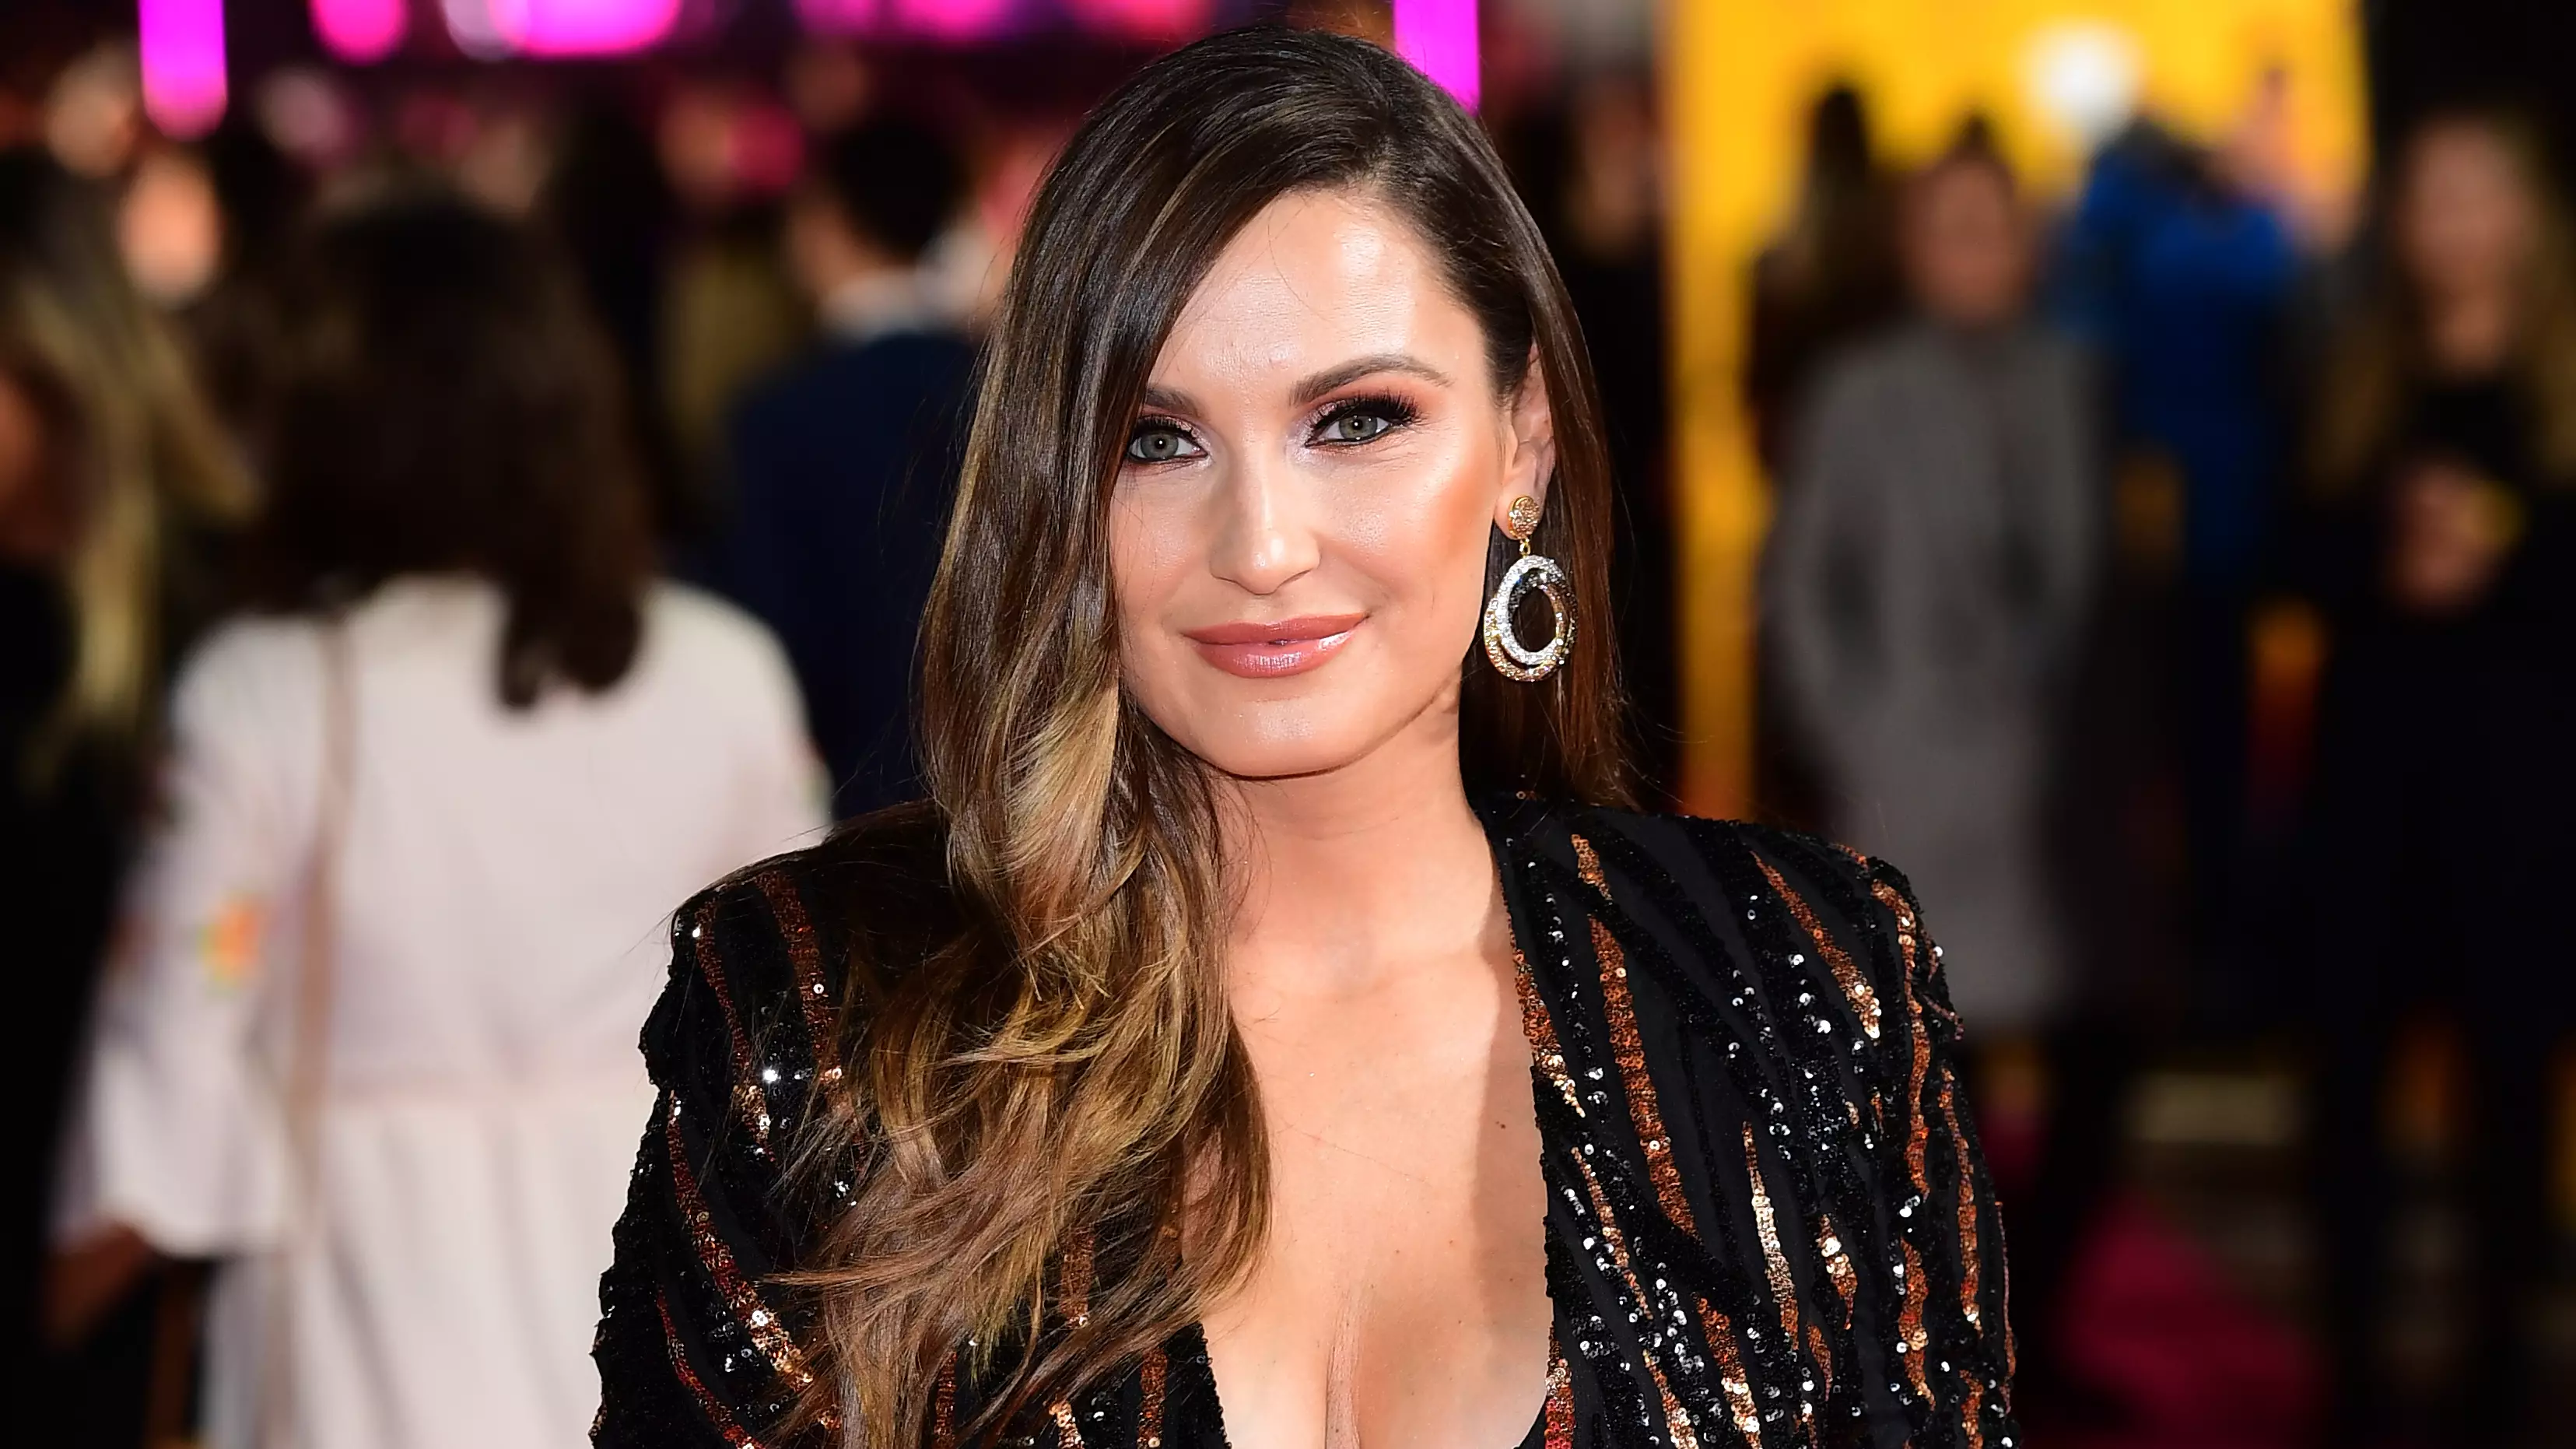 Sam Faiers Didn't Buy Her Kids Christmas Presents This Year As They're Already 'So Fortunate'